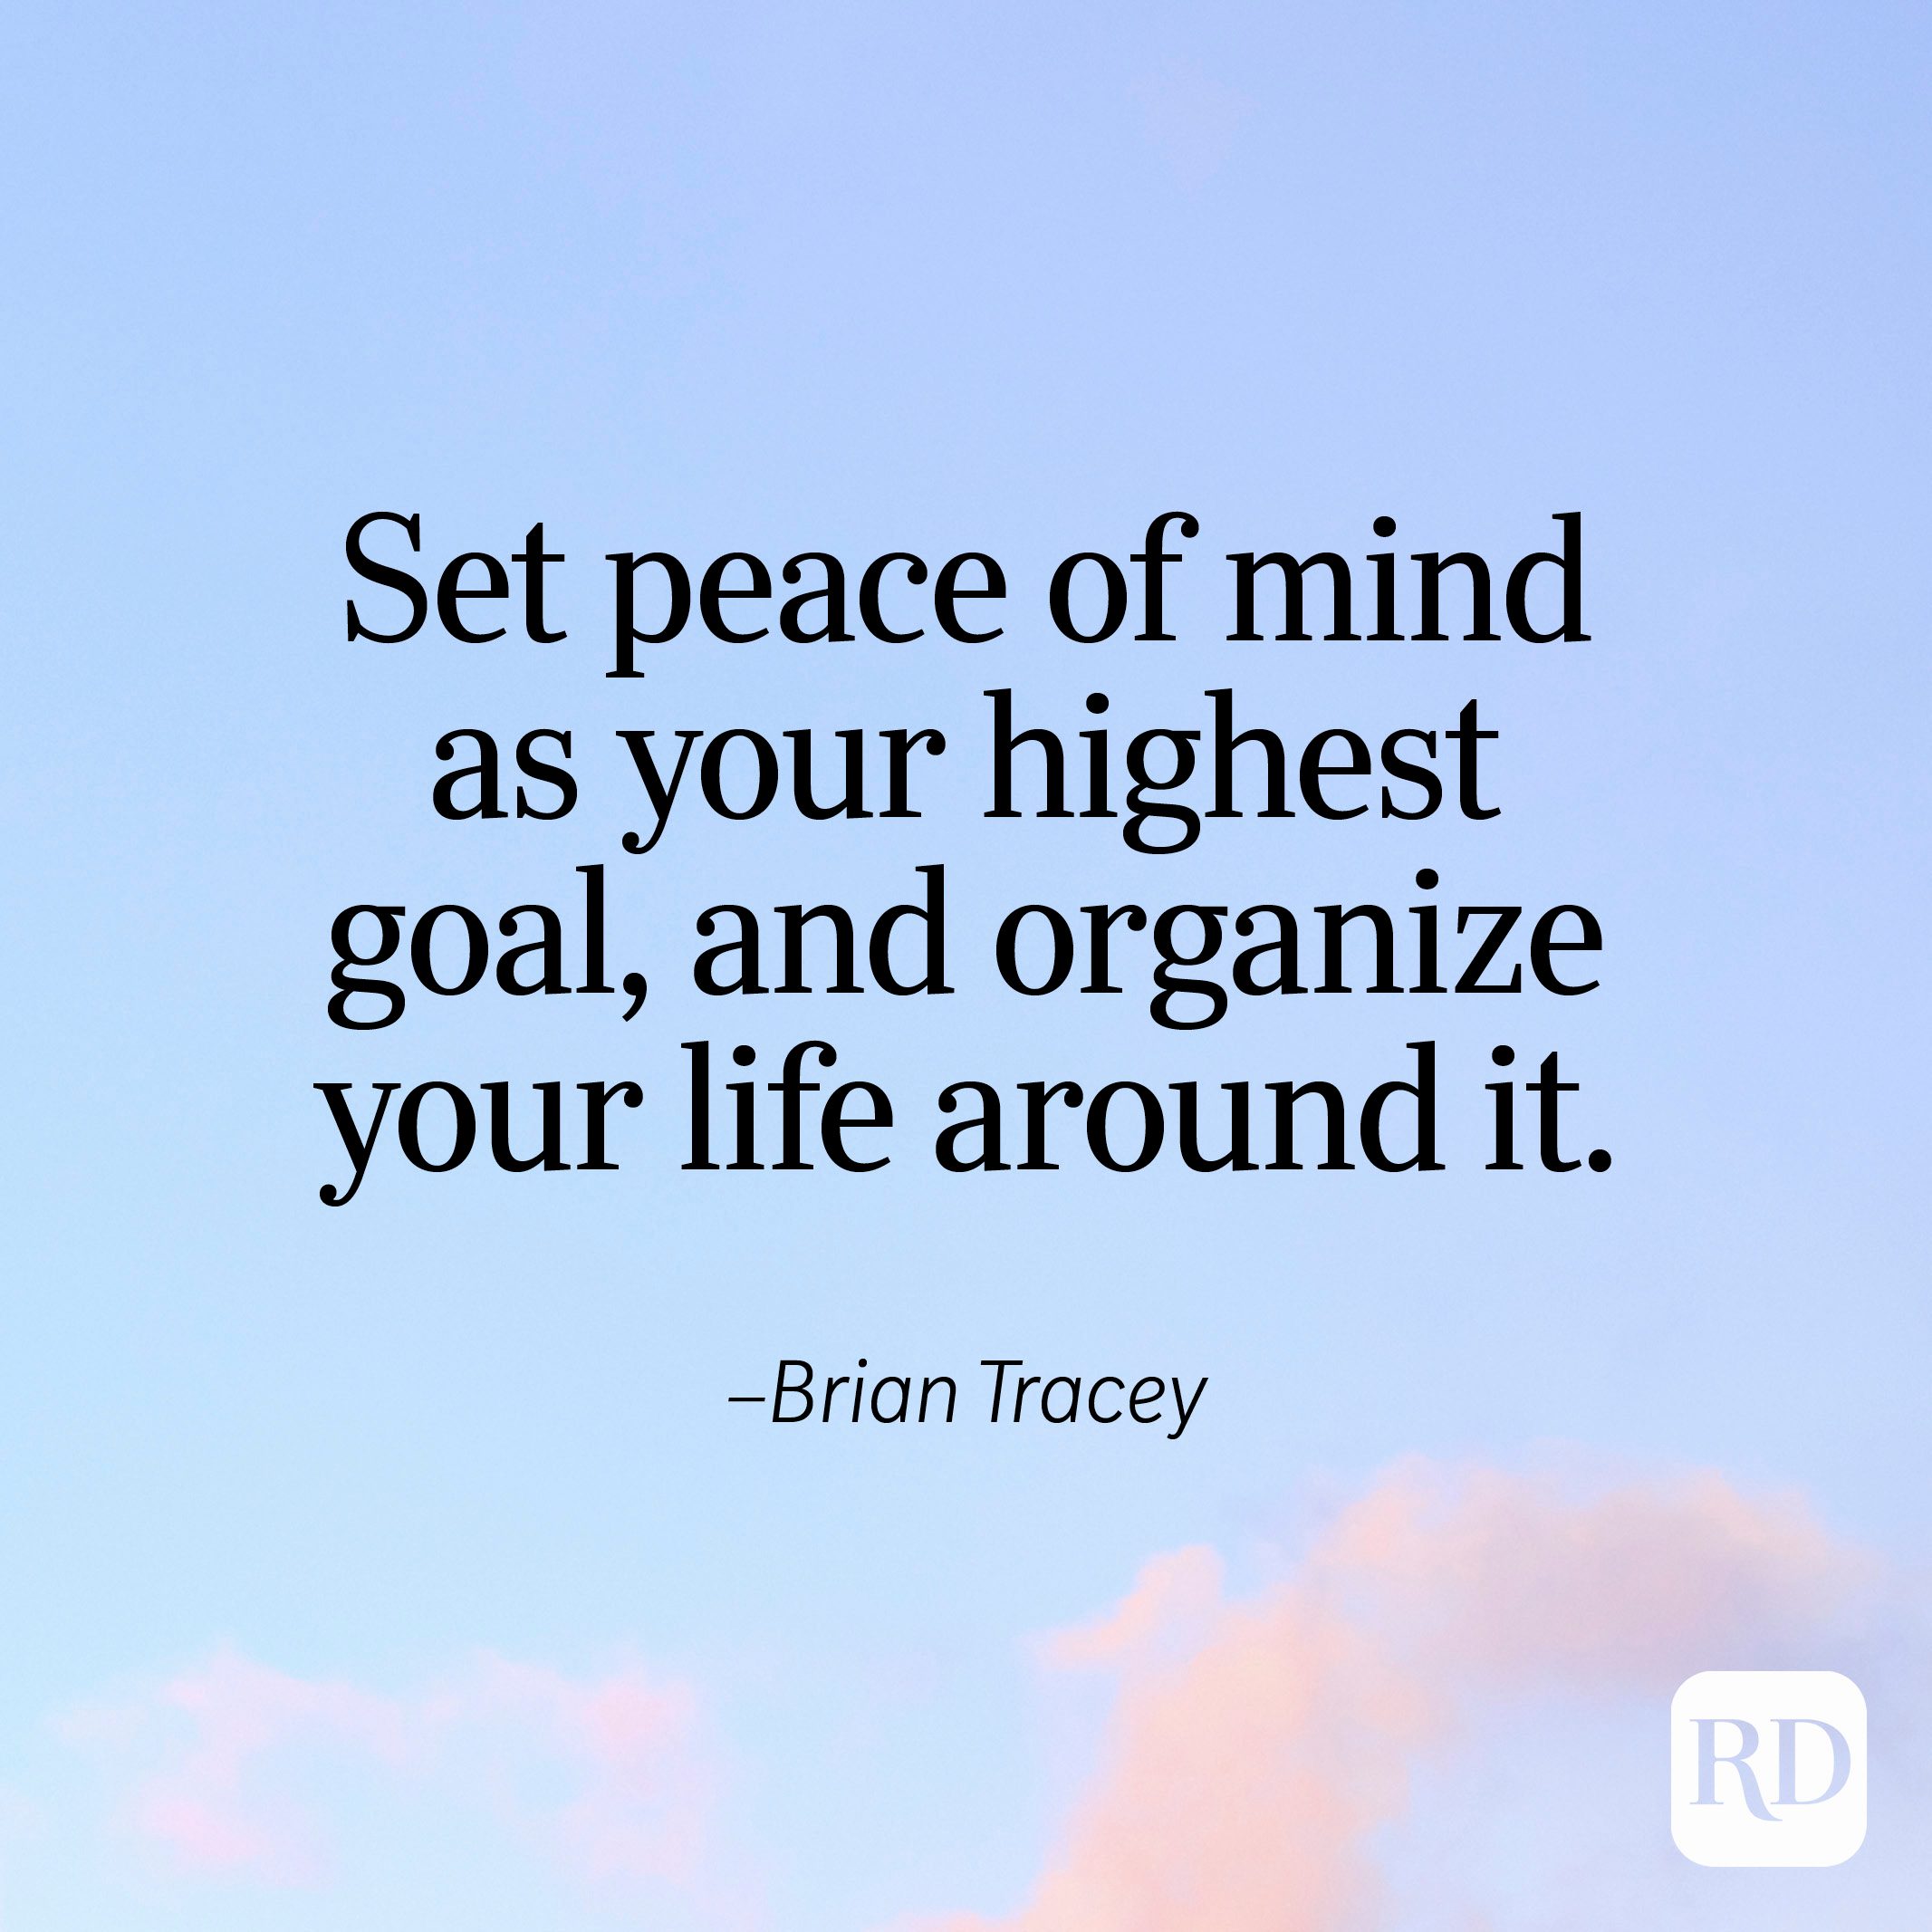 "Set peace of mind as your highest goal, and organize your life around it." —Brian Tracey